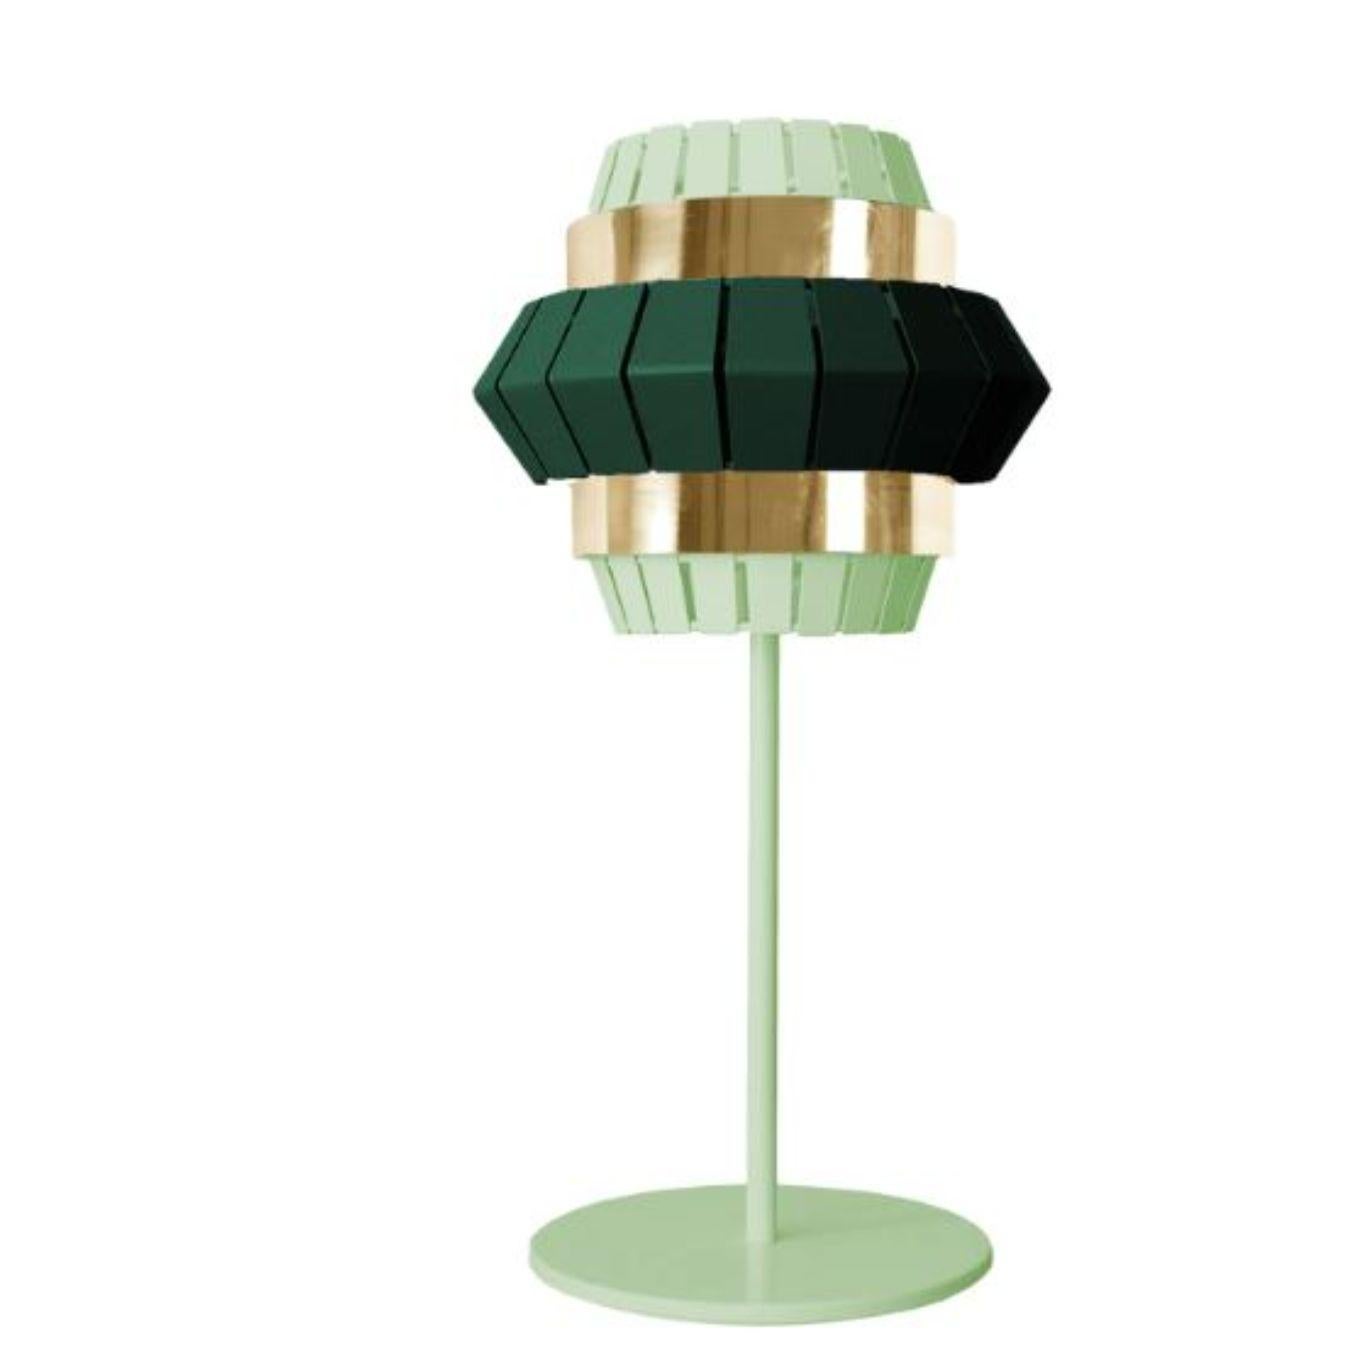 Dream and Moss comb table lamp with brass ring by Dooq
Dimensions: W 25.5 x D 25.5 x H 60 cm
Materials: lacquered metal, polished brass.
Also available in different colors and materials.

Information:
230V/50Hz
E14/1x20W